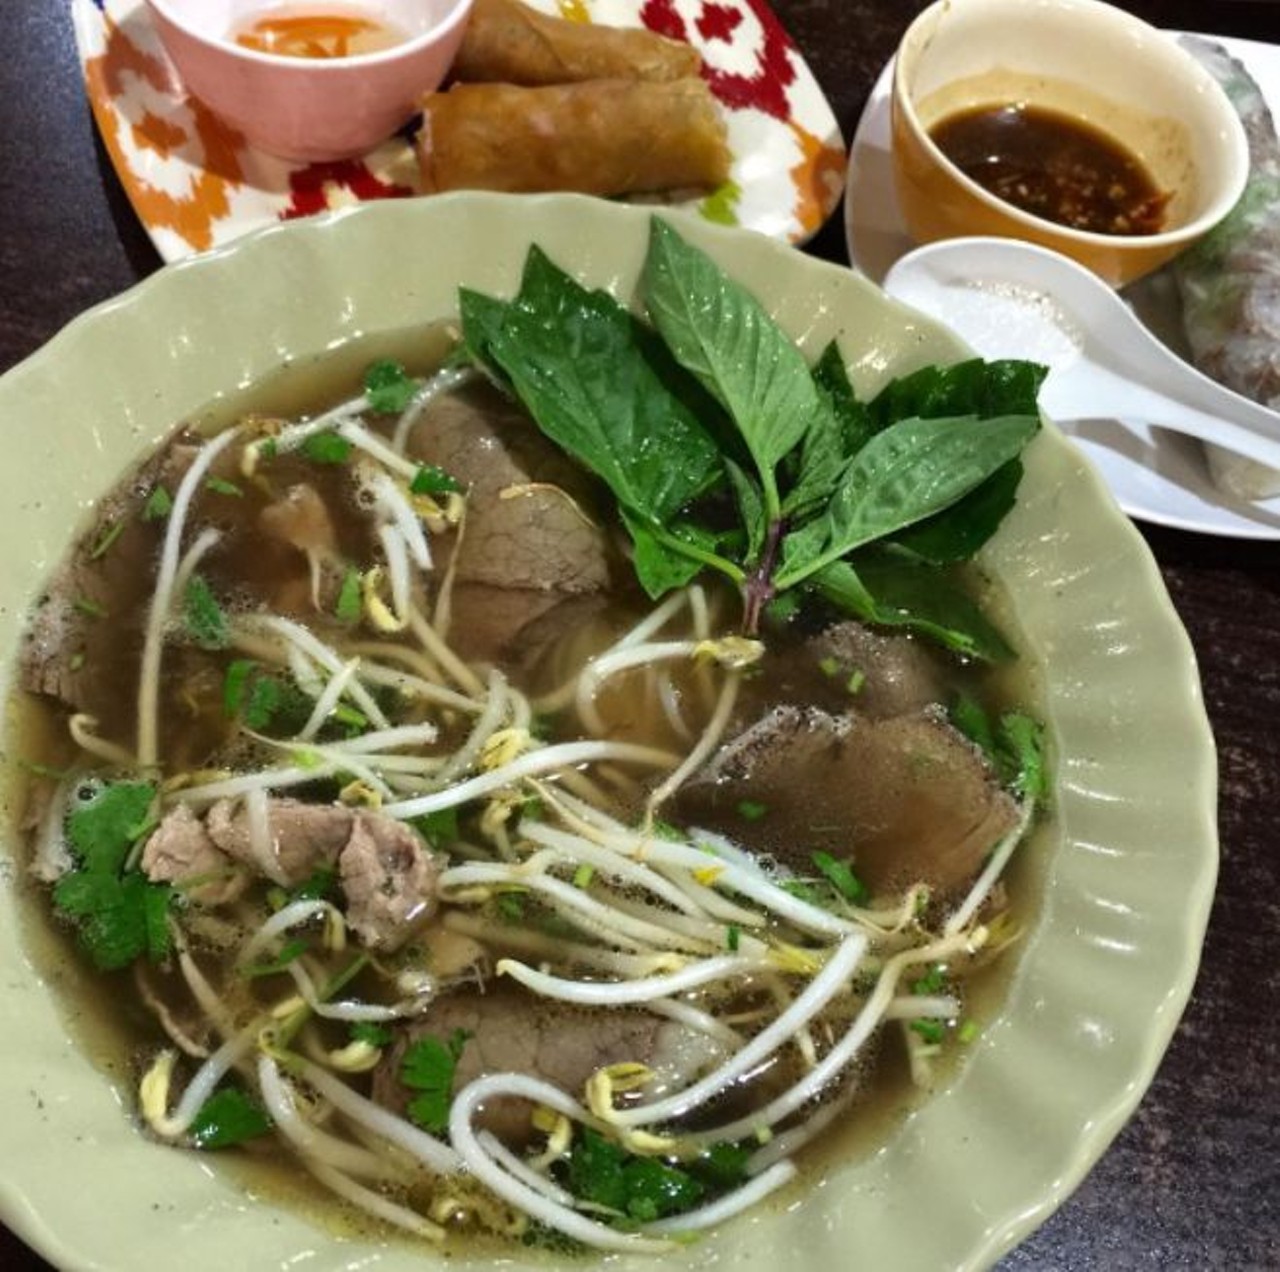 Pho Hong Phat
6180 Wurzbach Road, (210) 523-2888
Whether it&#146;s the fresh bun bowl, or steamy bowl this little gem delivers larger-than-life servings.
Photo via Instagram,  petey.c